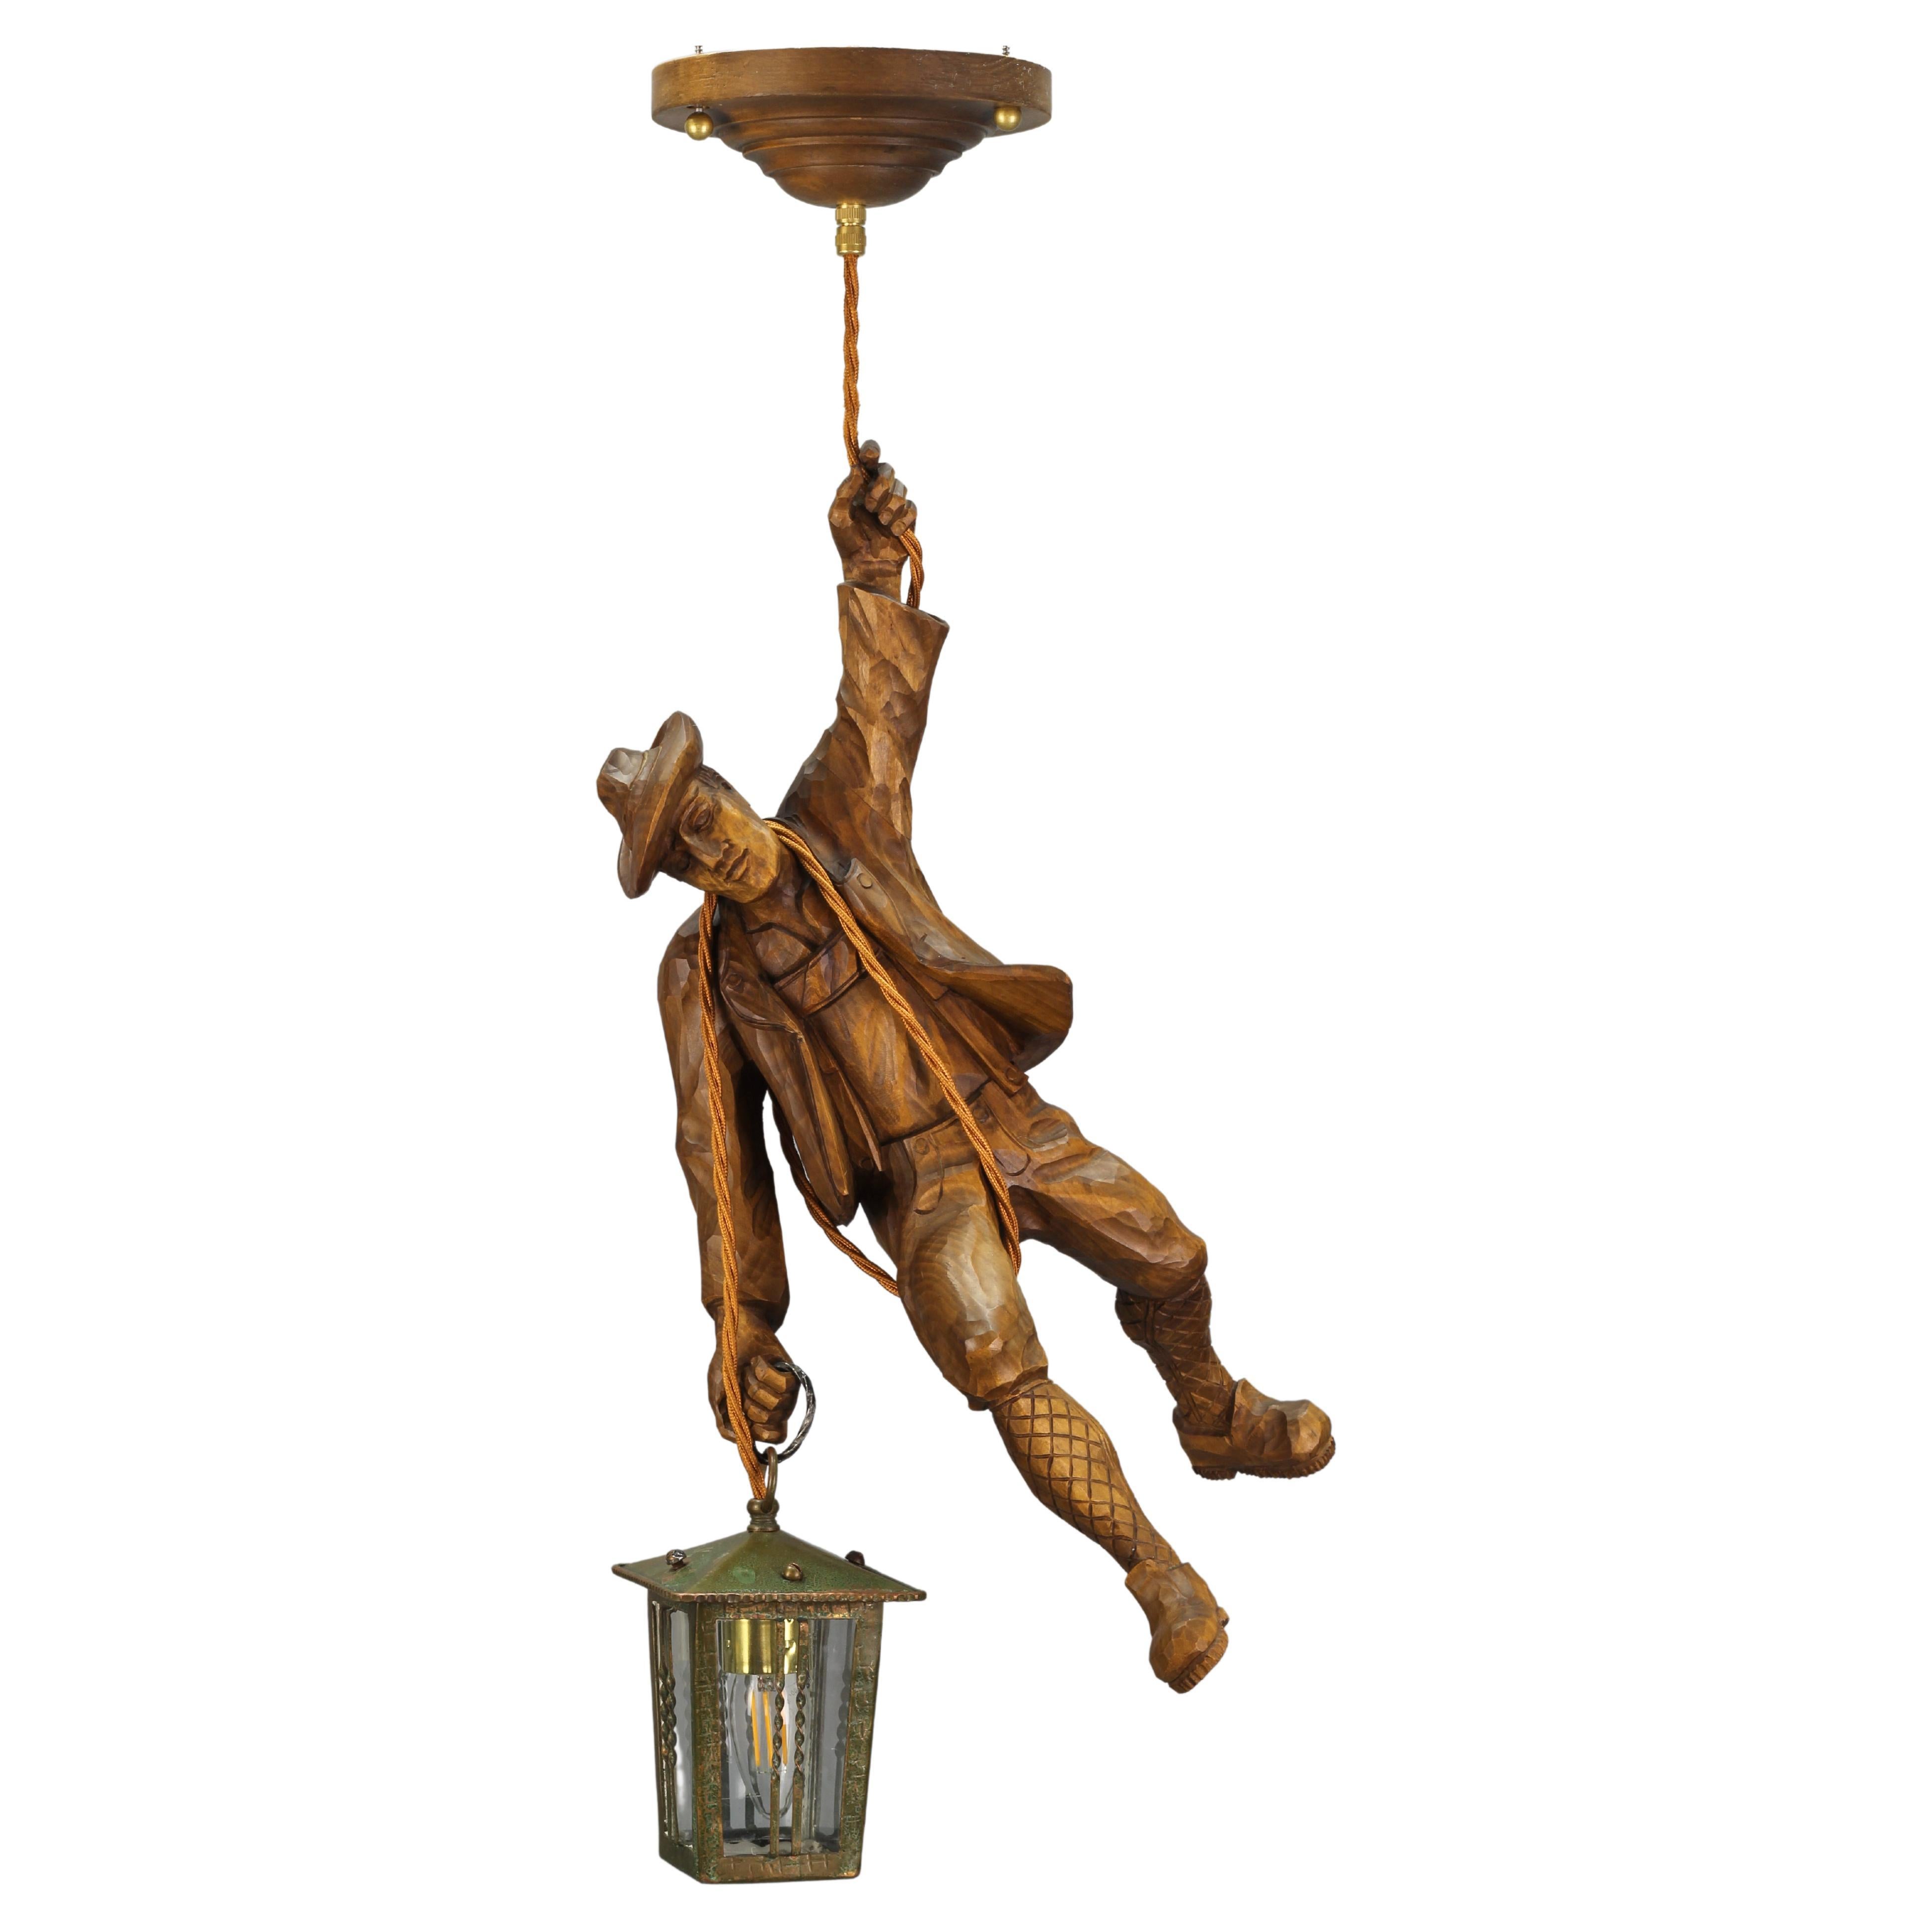 German Pendant Light with a Carved Wooden Figure of Mountain Climber and Lantern For Sale